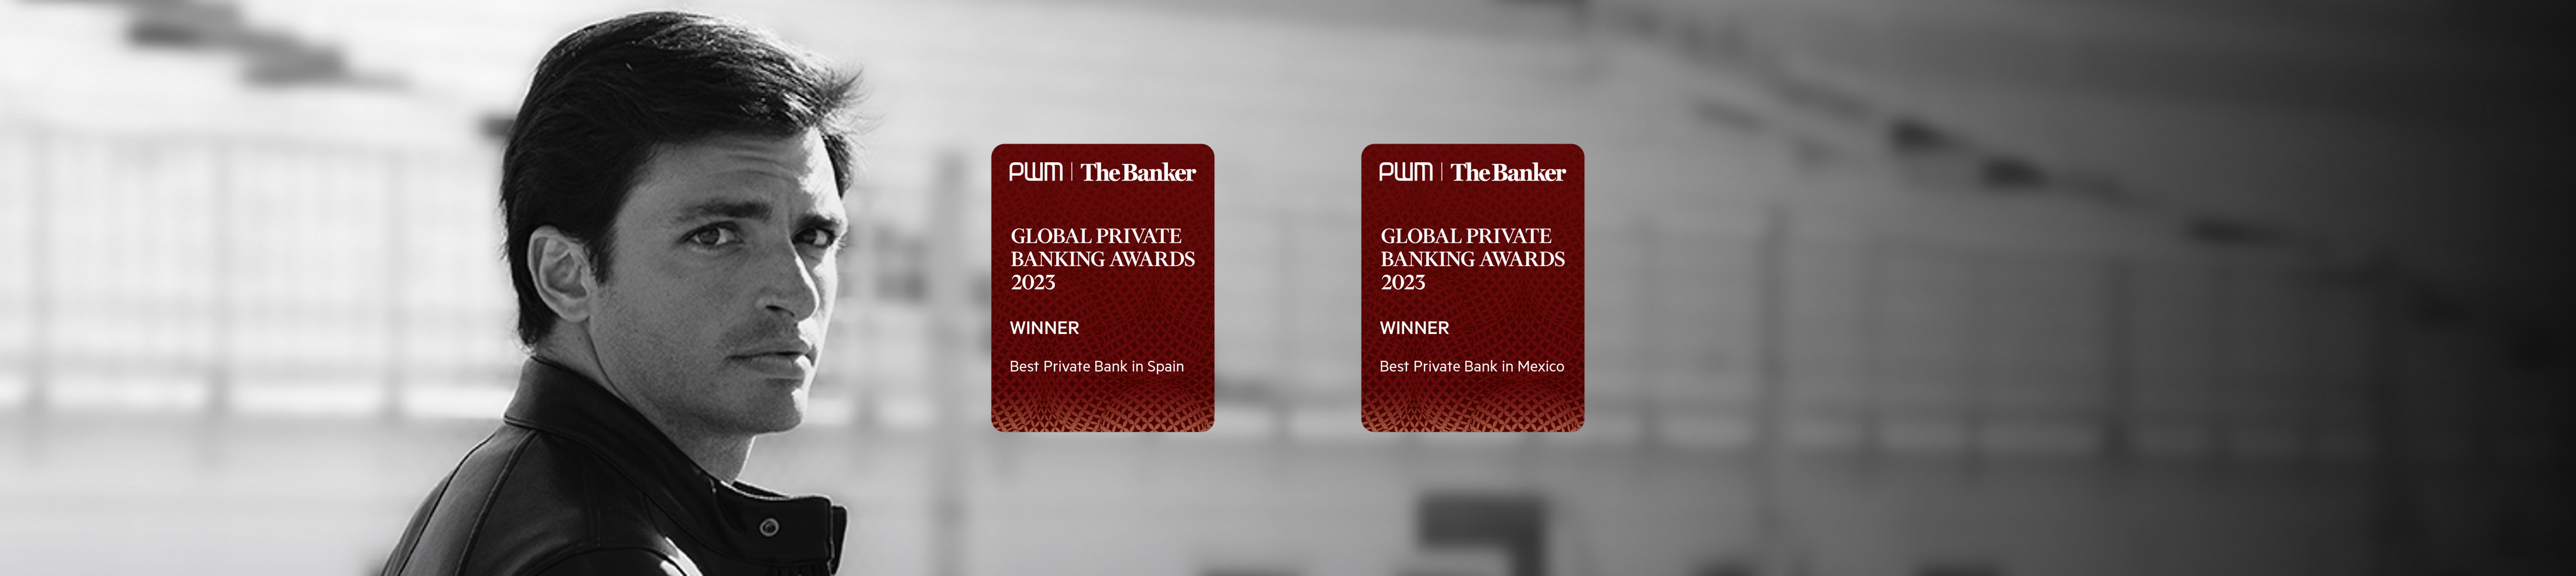 best-private-bank-the-banker-2023